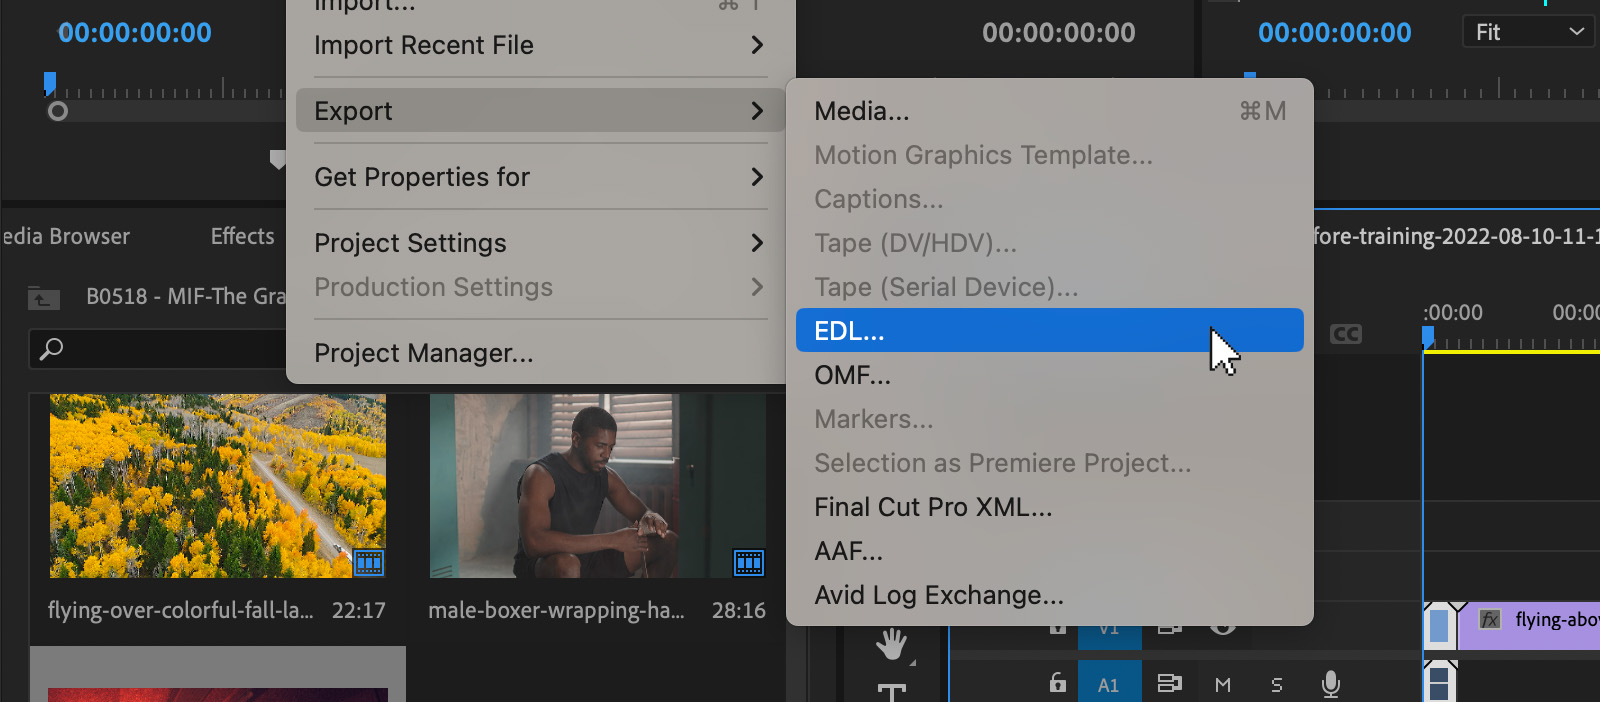 Exporting an EDL (Edit Decision List) from your NLE will preserve your basic edit for archival.